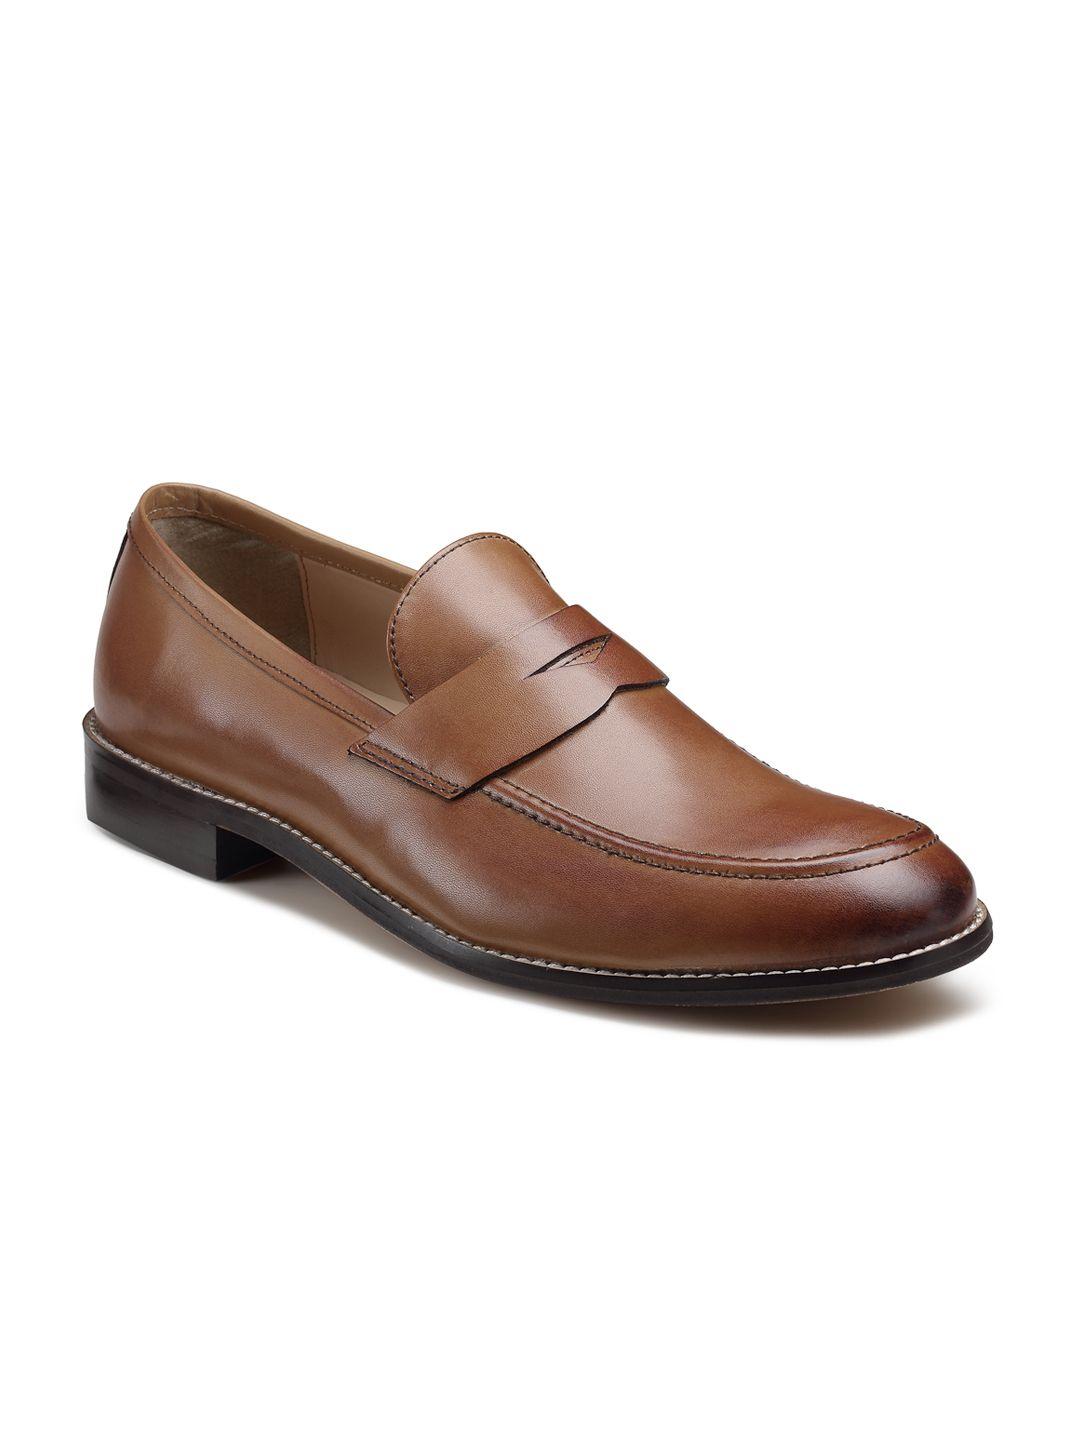 hats off accessories men tan brown solid formal slip-on shoes